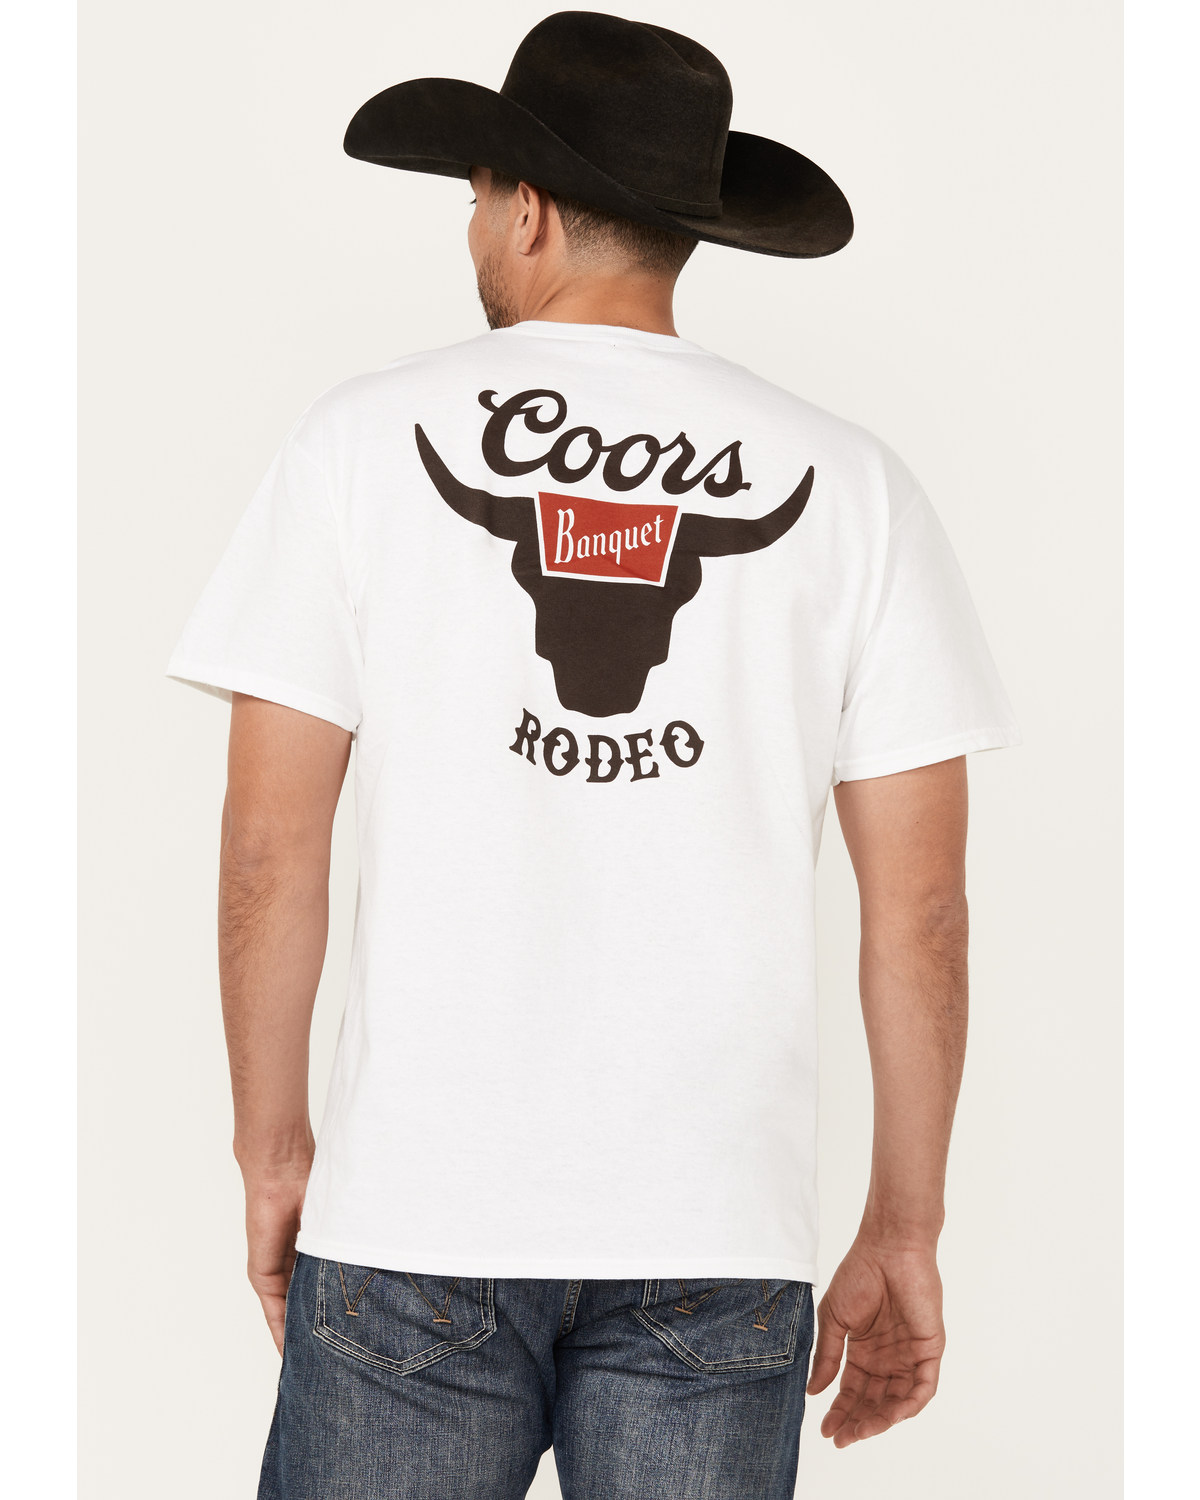 Changes Men's Coors Rodeo Logo Short Sleeve Graphic T-Shirt